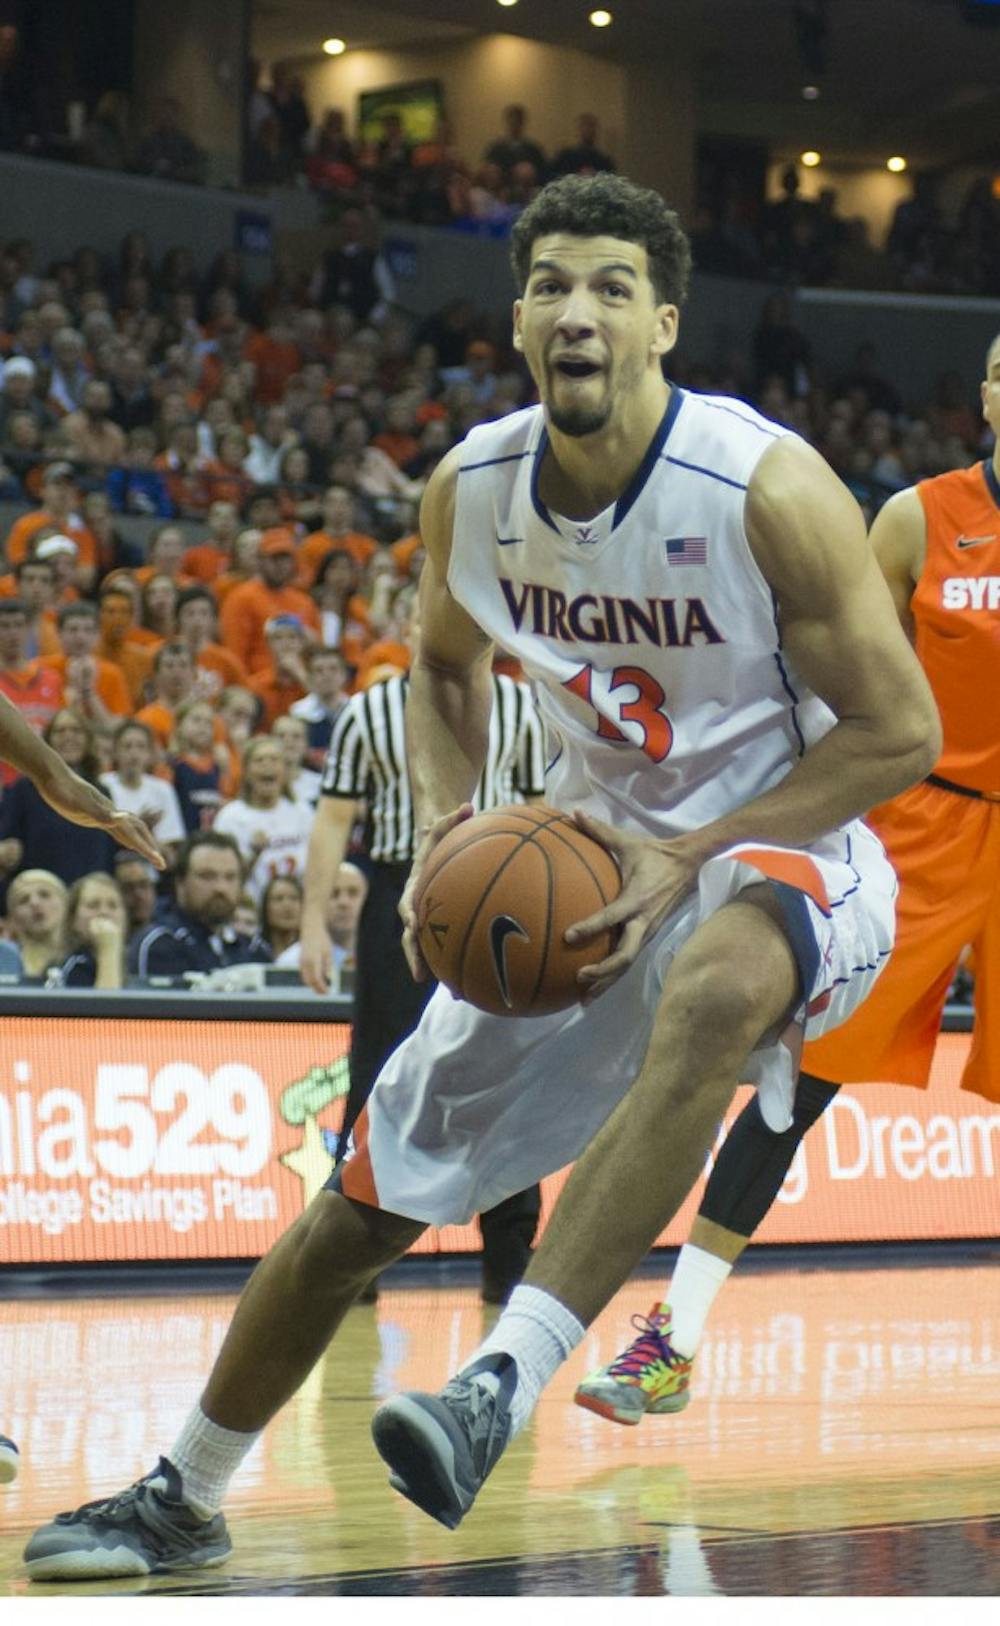 	<p>Sophomore forward Anthony Gill led No. 5 Virginia with 15 points, including the game-tying basket to force overtime. However, the Terrapins ultimately upset the Cavaliers in College Park, 75-69.</p>